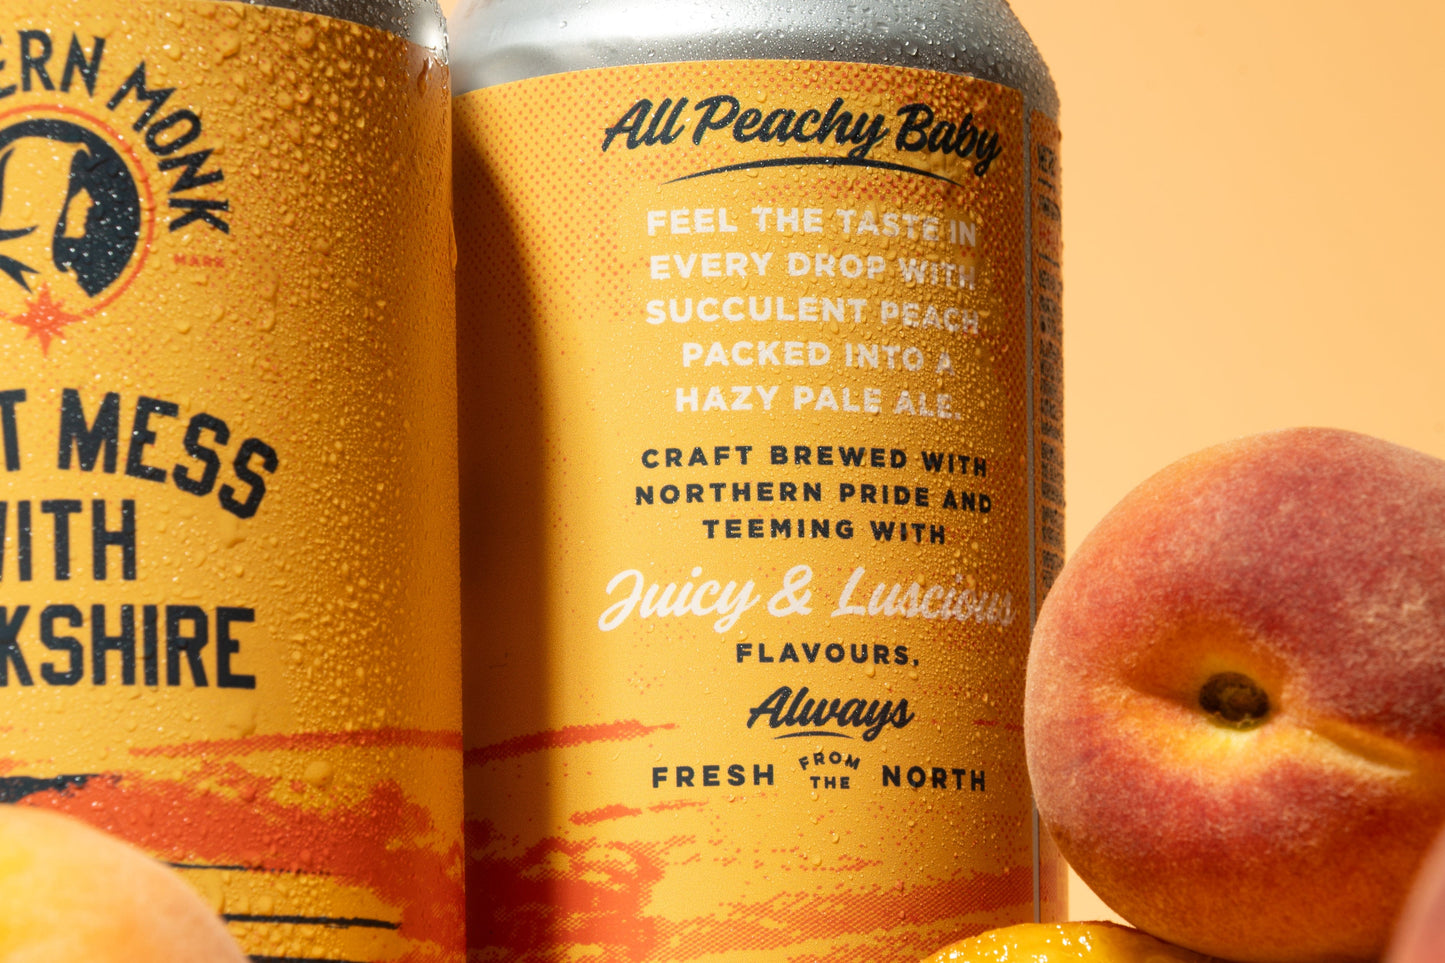 DON'T MESS WITH YORKSHIRE PEACH // HAZY PALE ALE